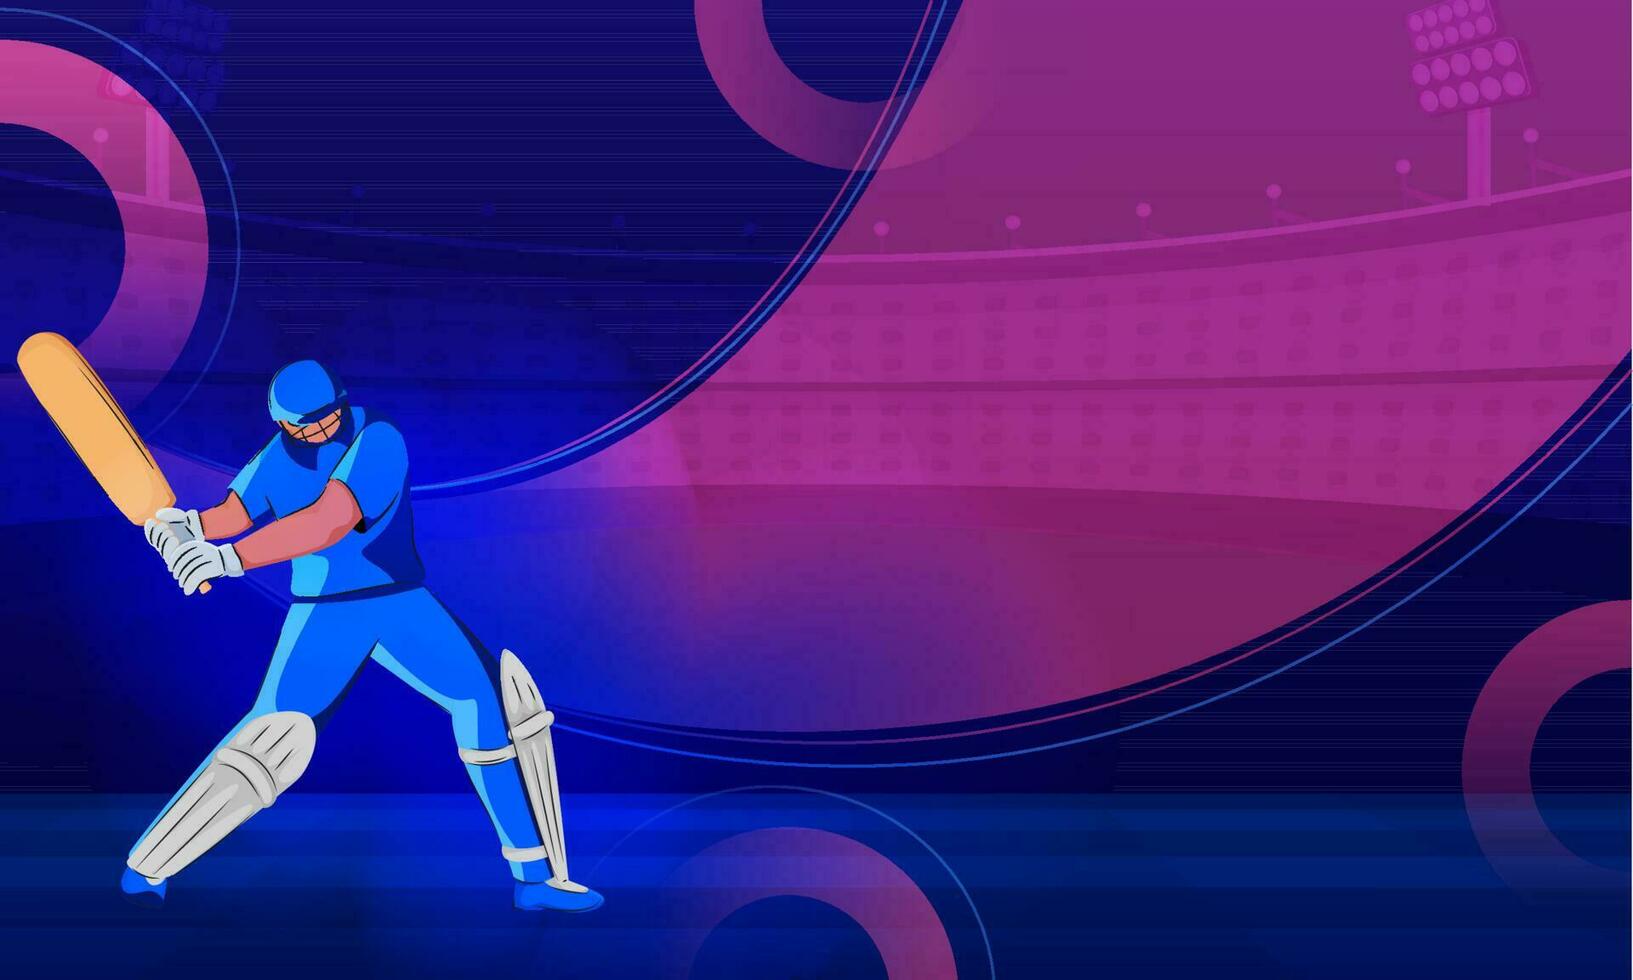 Cricket Championship Concept with Character Illustration of a Batter in Blue Jersey, Stadium Background and Space for your text. vector